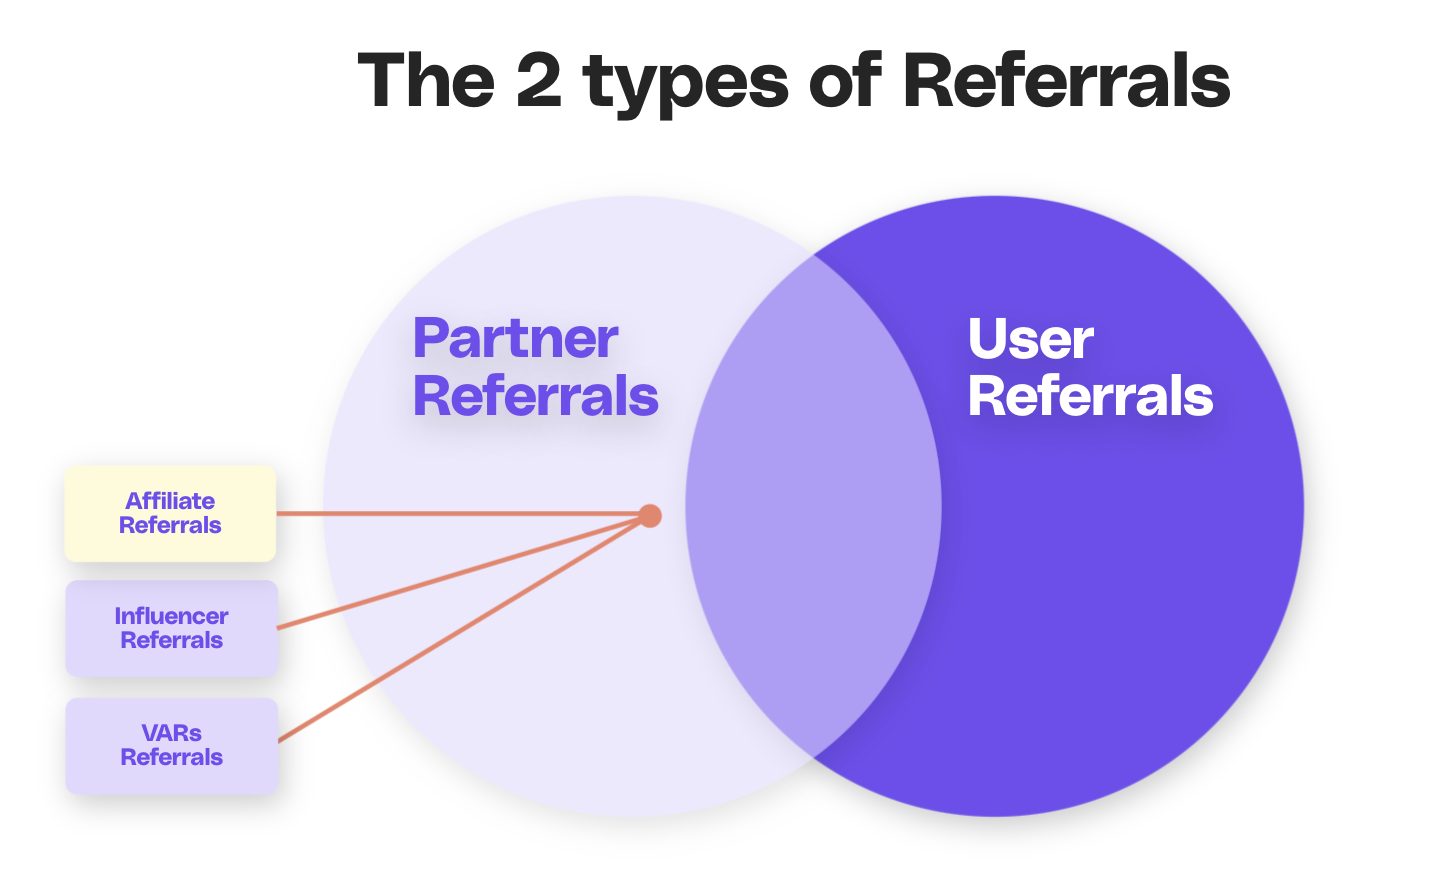 Image showing two types of referrals